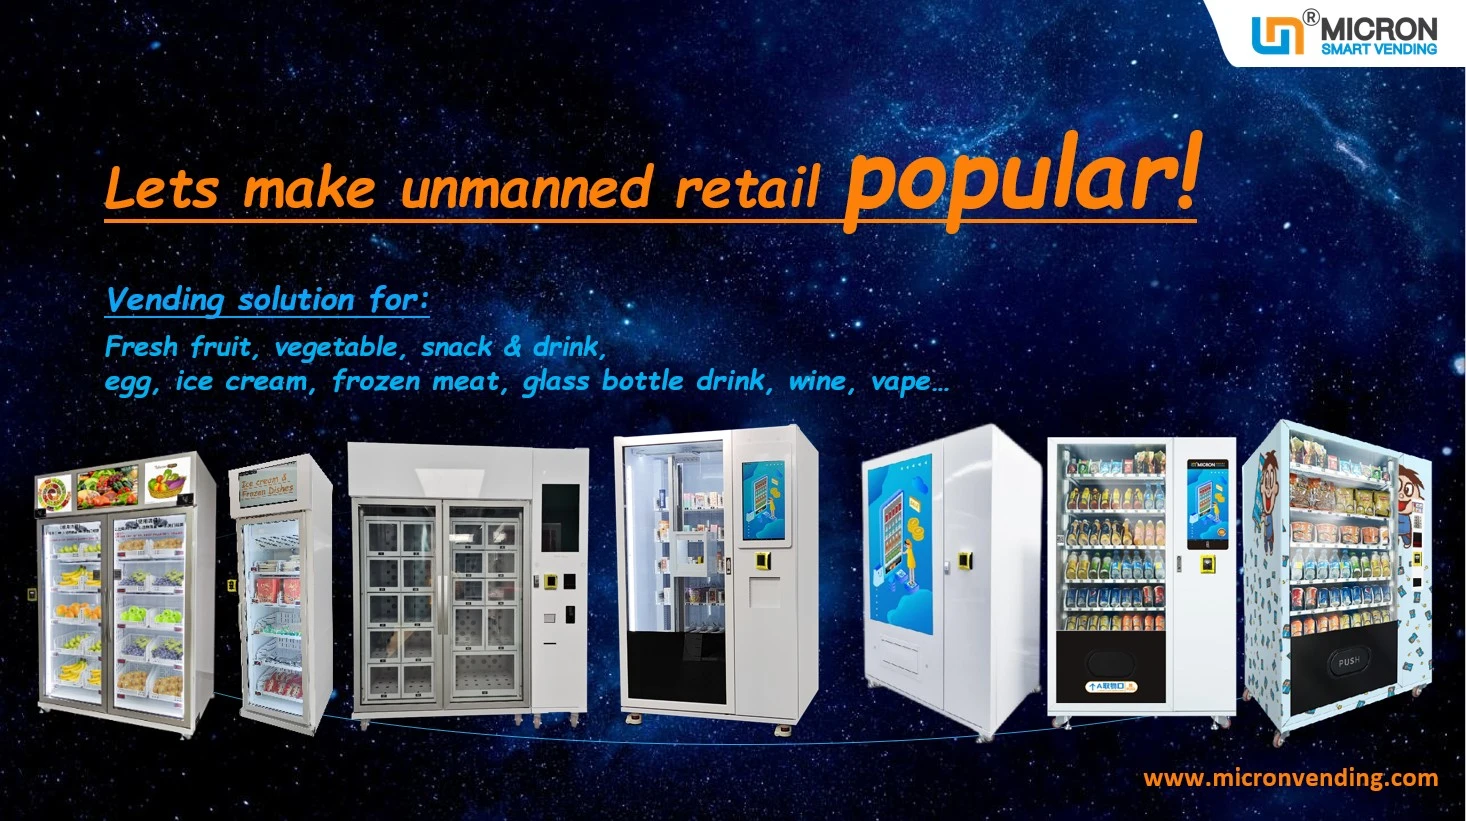 Vending machine made in China that support Malaysia E-wallet, Grab pay, Boost, Touch n go